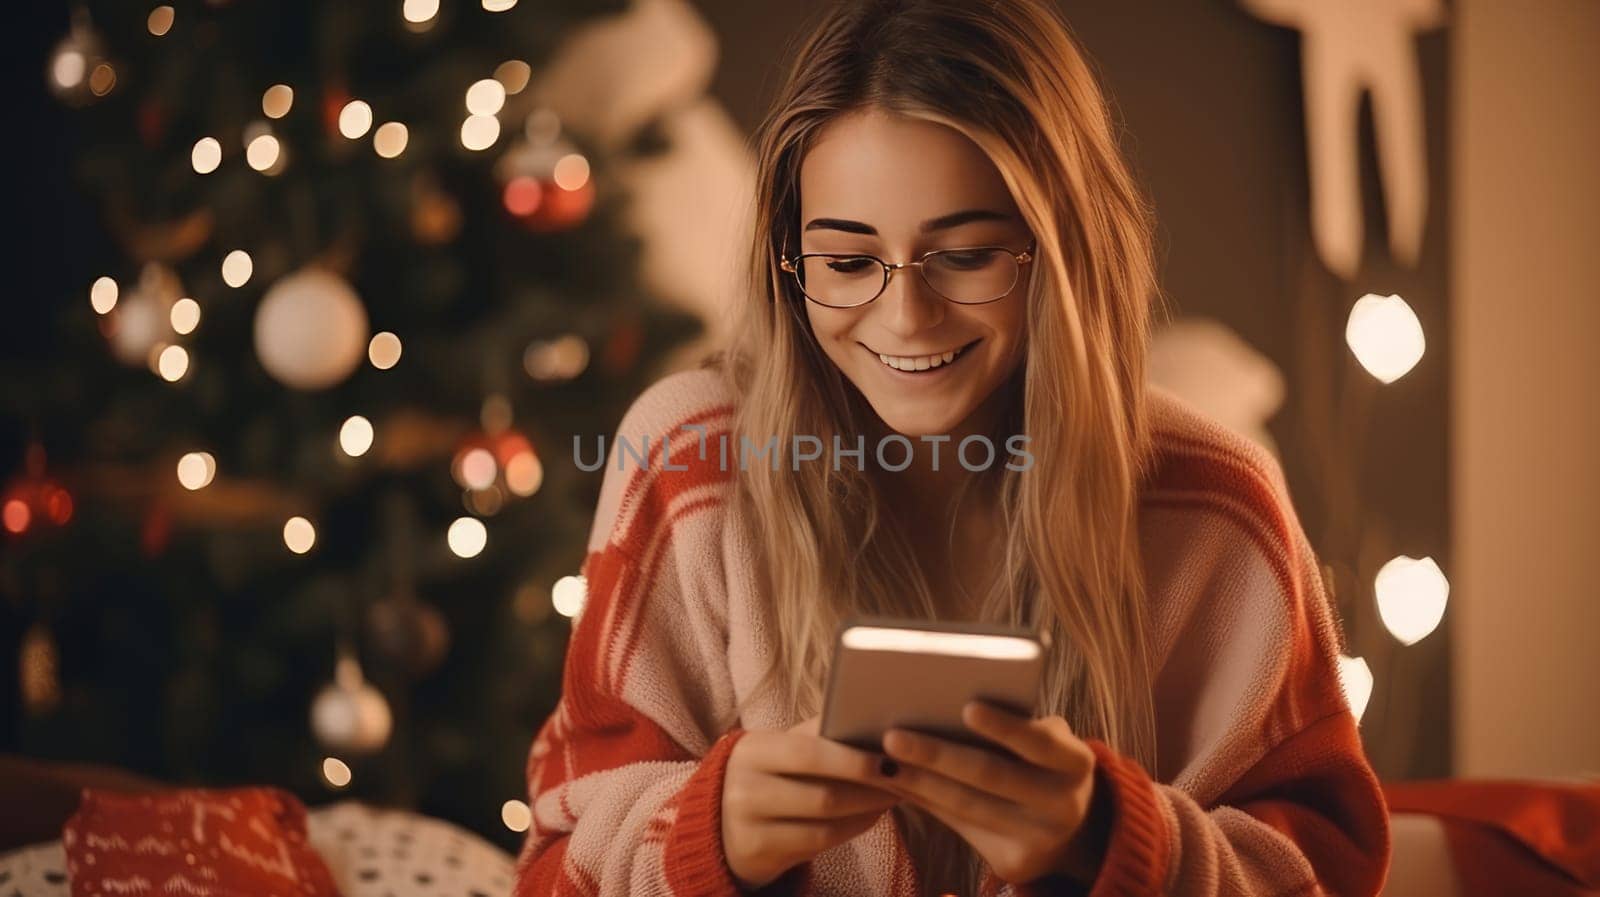 Young woman in pajamas in bed orders New Year's gifts during Christmas holidays at home using smartphone and credit card by Alla_Yurtayeva